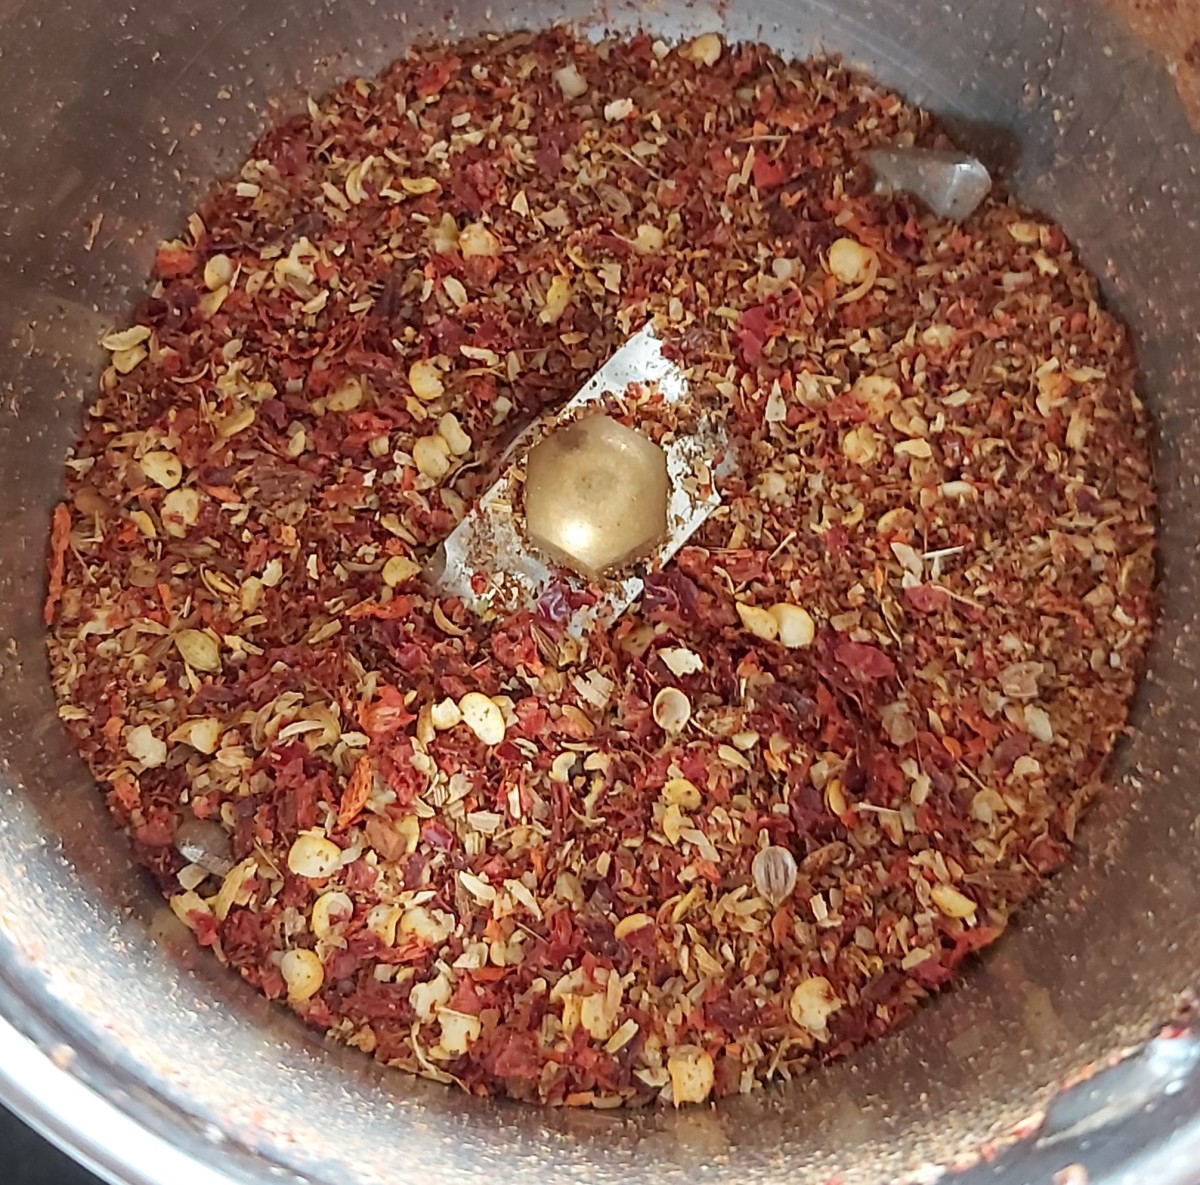 Grind the spices coarsely.